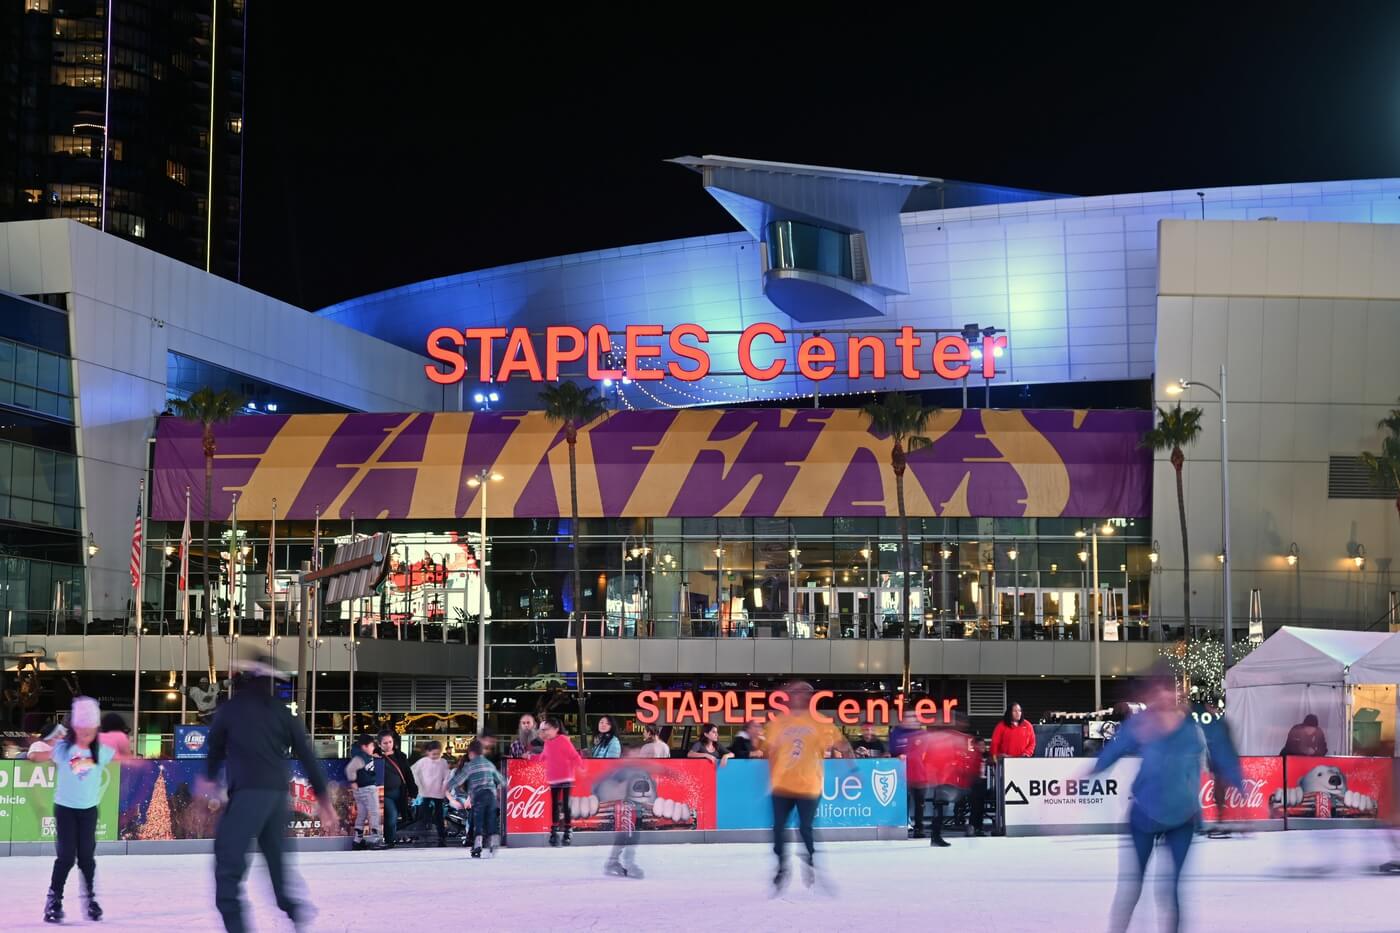 Jan 7, 2020; Los Angeles, California, USA; Patrons ice skate at LA Live plaza outside of the Staples Center before a game between the Los Angeles Lakers and the New York Knicks. Mandatory Credit: Kirby Lee-USA TODAY Sports